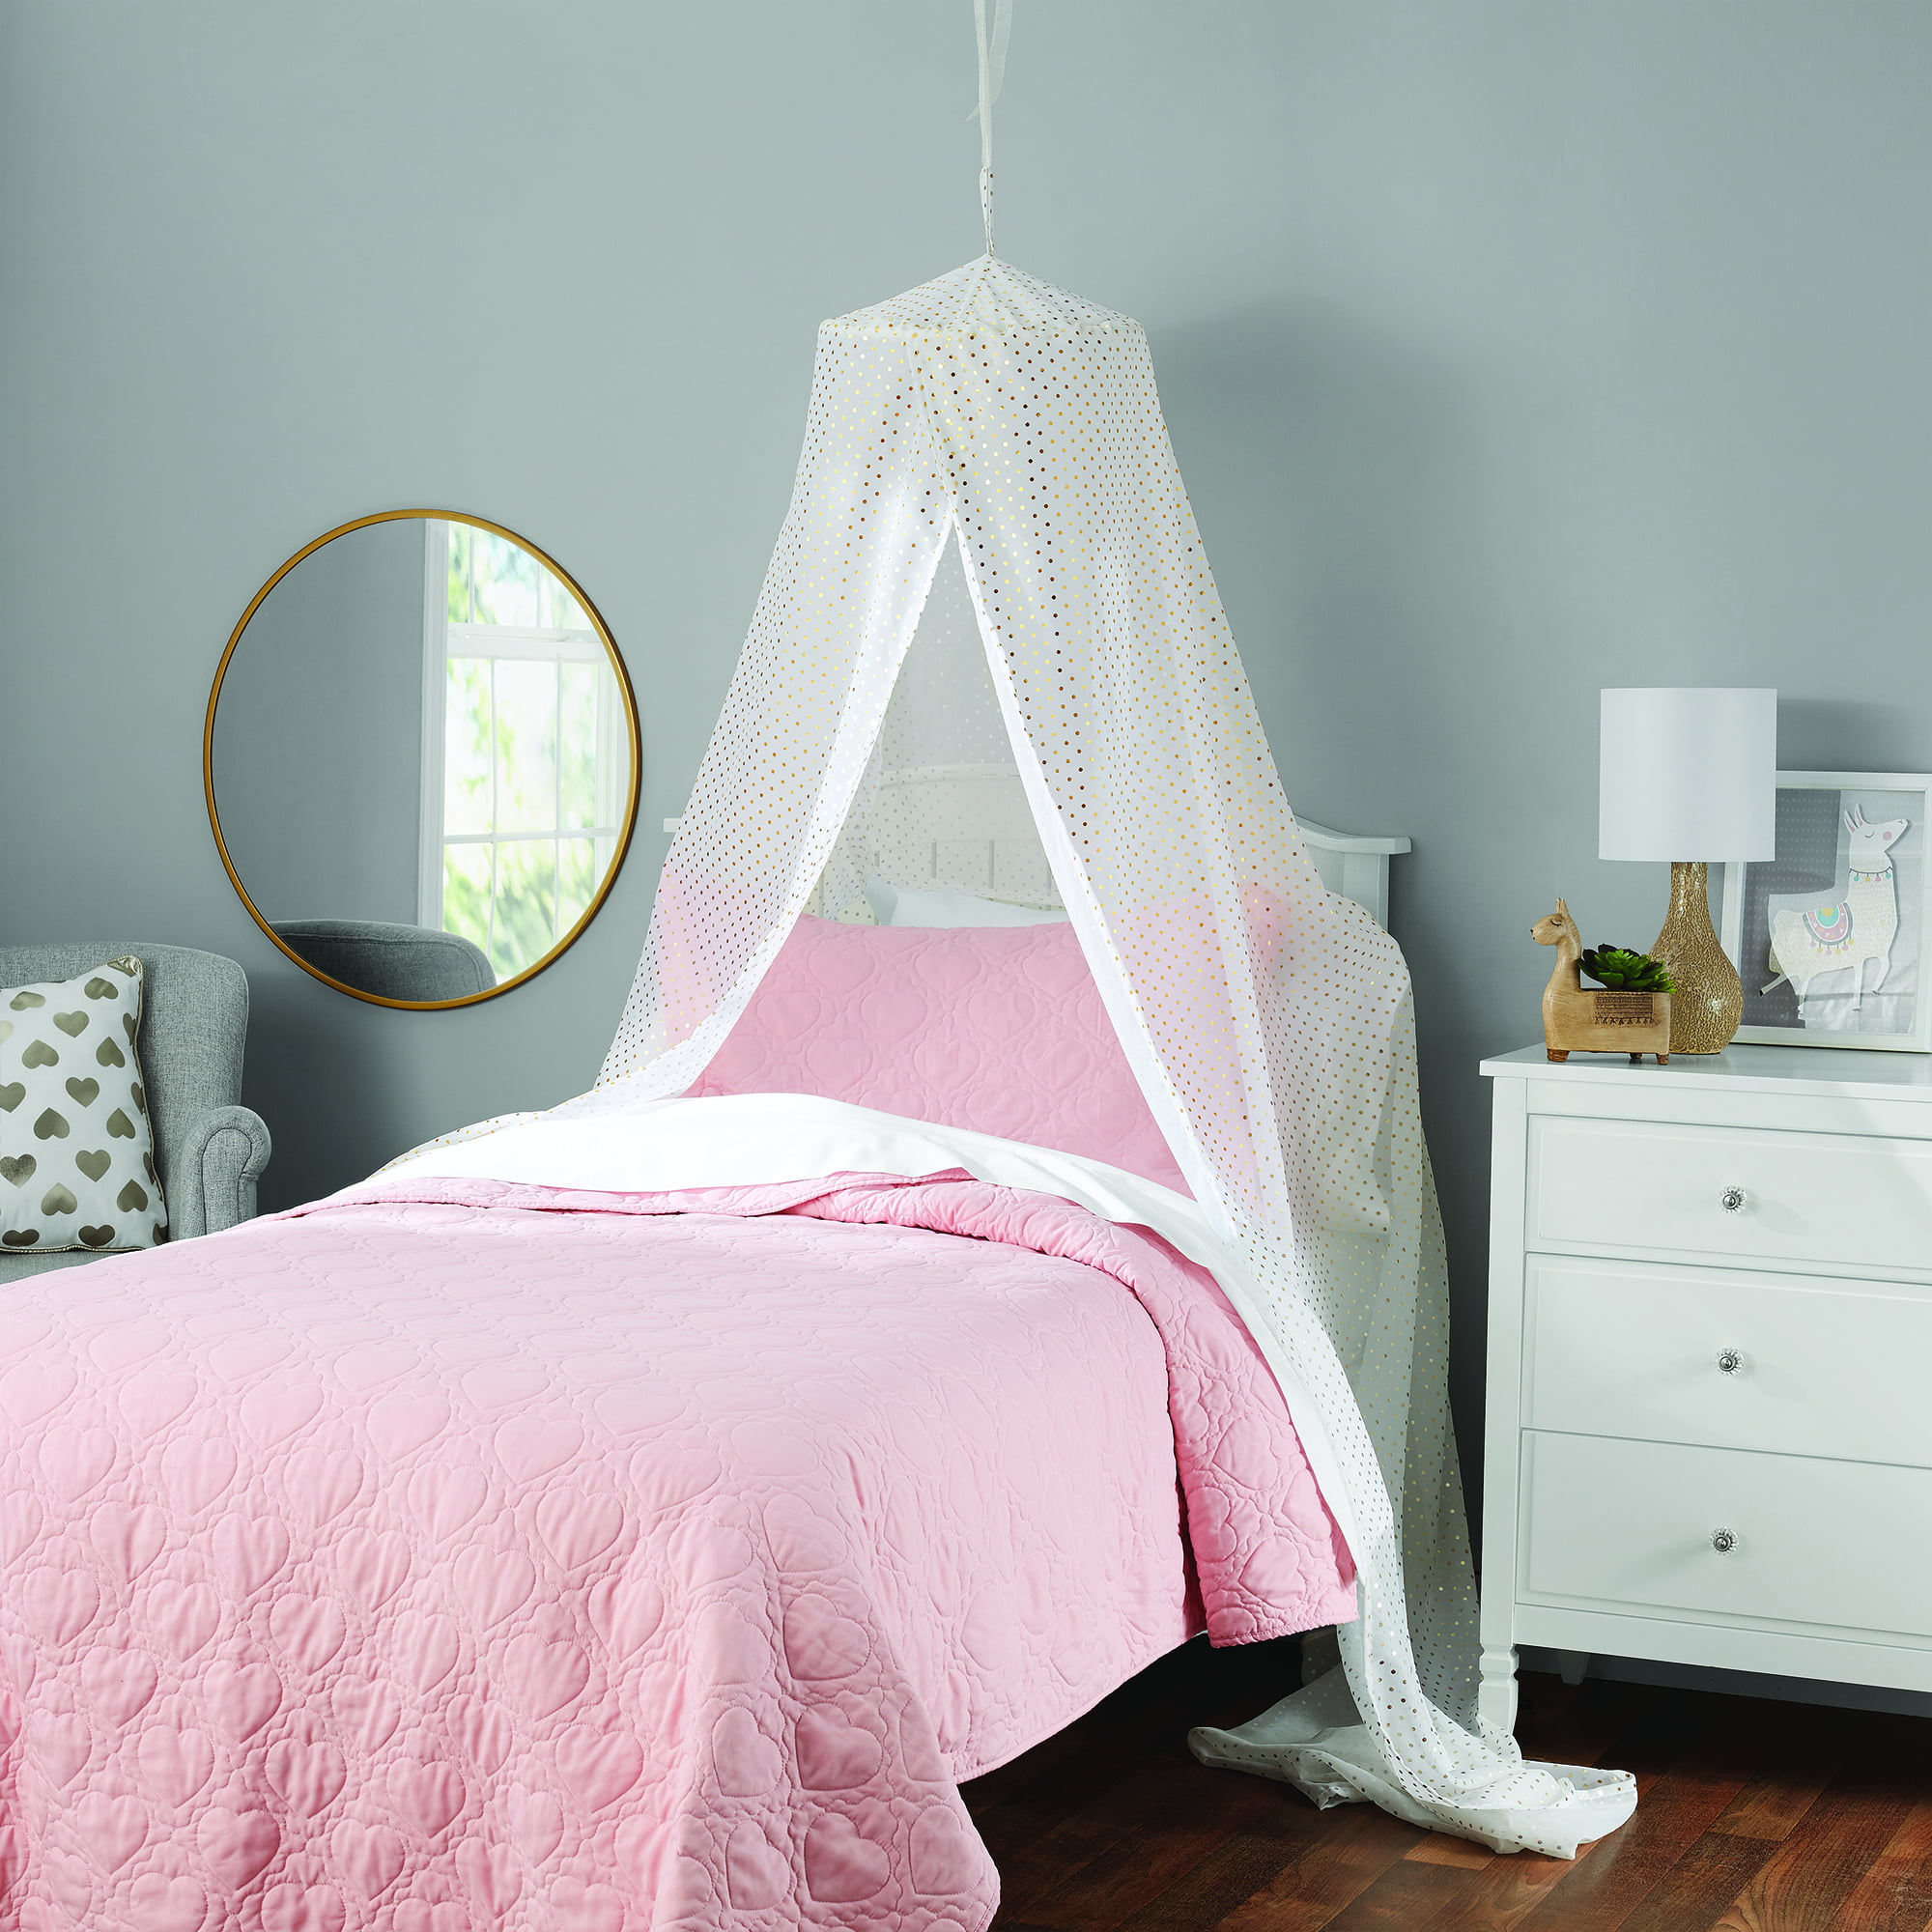 children's over bed canopy